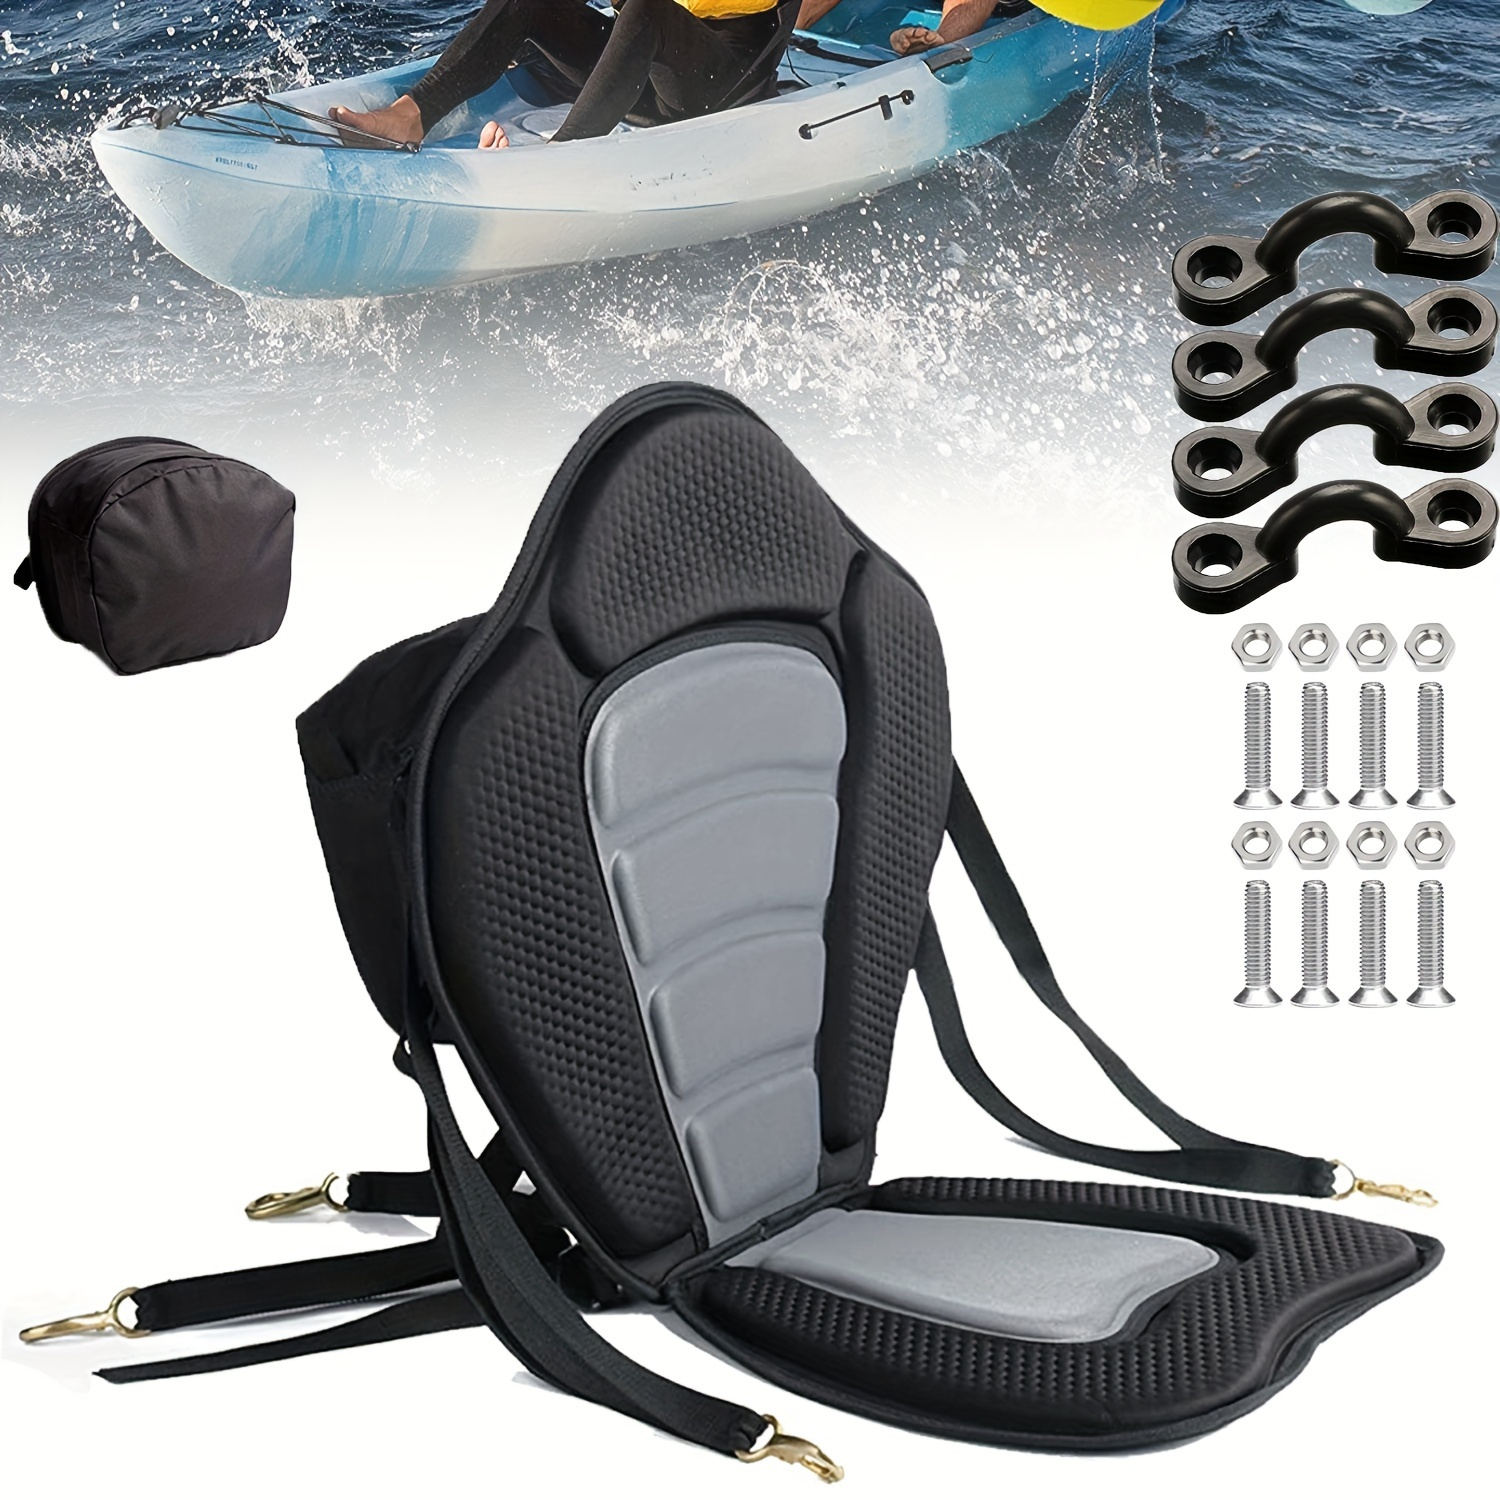 Hornet Watersports Anti Slip Kayak Seat Cushion Ideal Waterproof Seat Pad for Sit in Kayak, Inflatable Kayak, Canoe and Boat. Comfort Accessories for